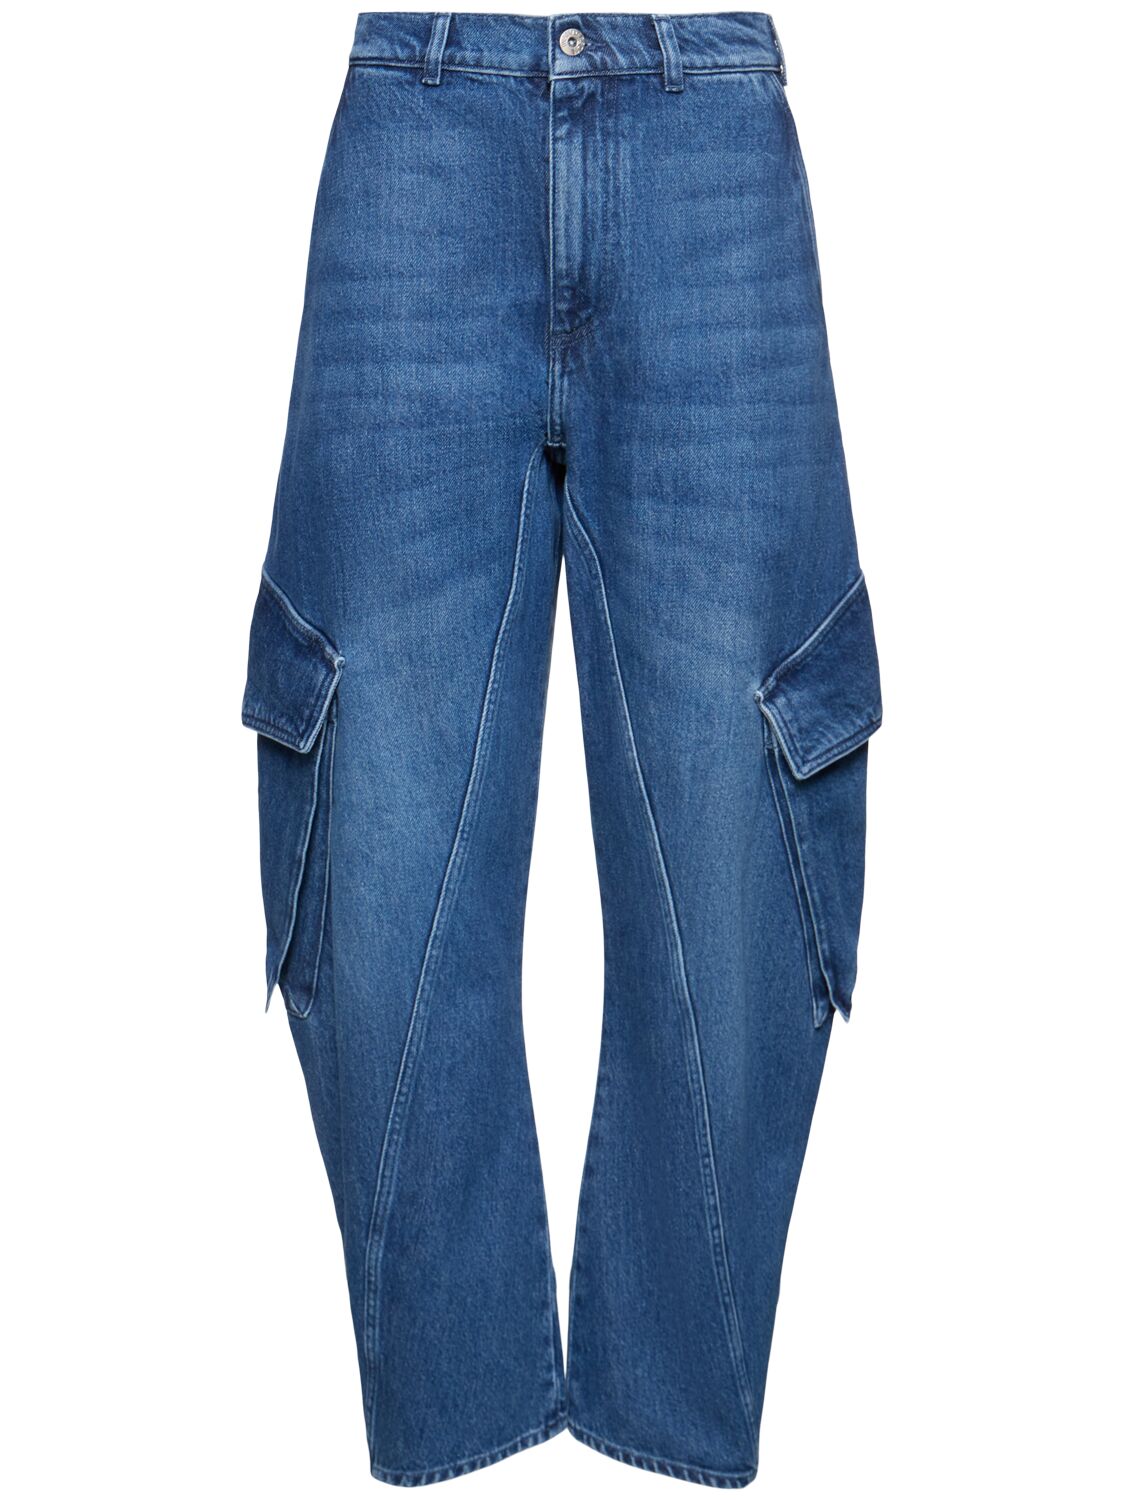 Twisted Cargo Jeans